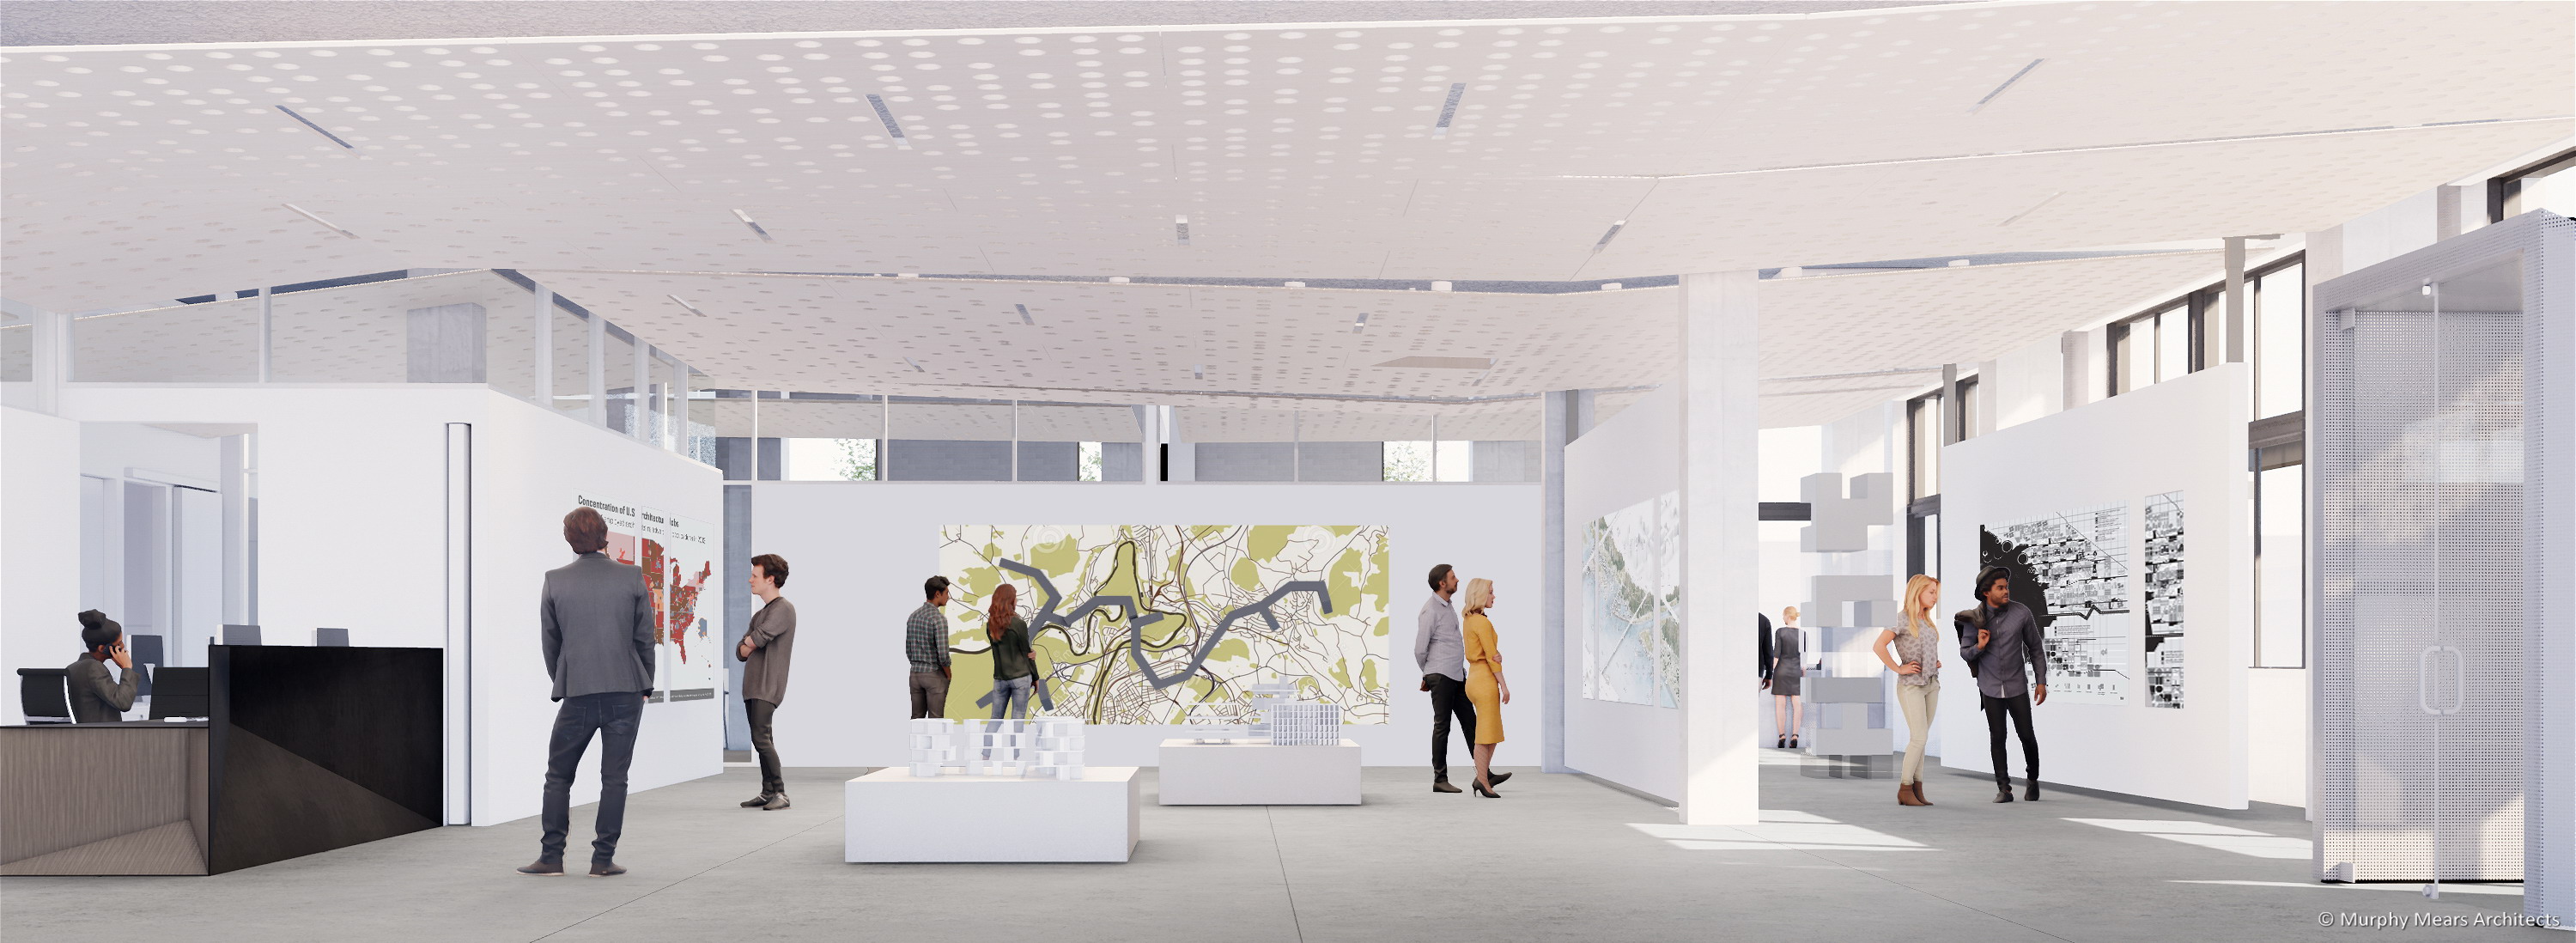 Architecture Center Houston rendering - Street level flexible space with an architectural exhibition.